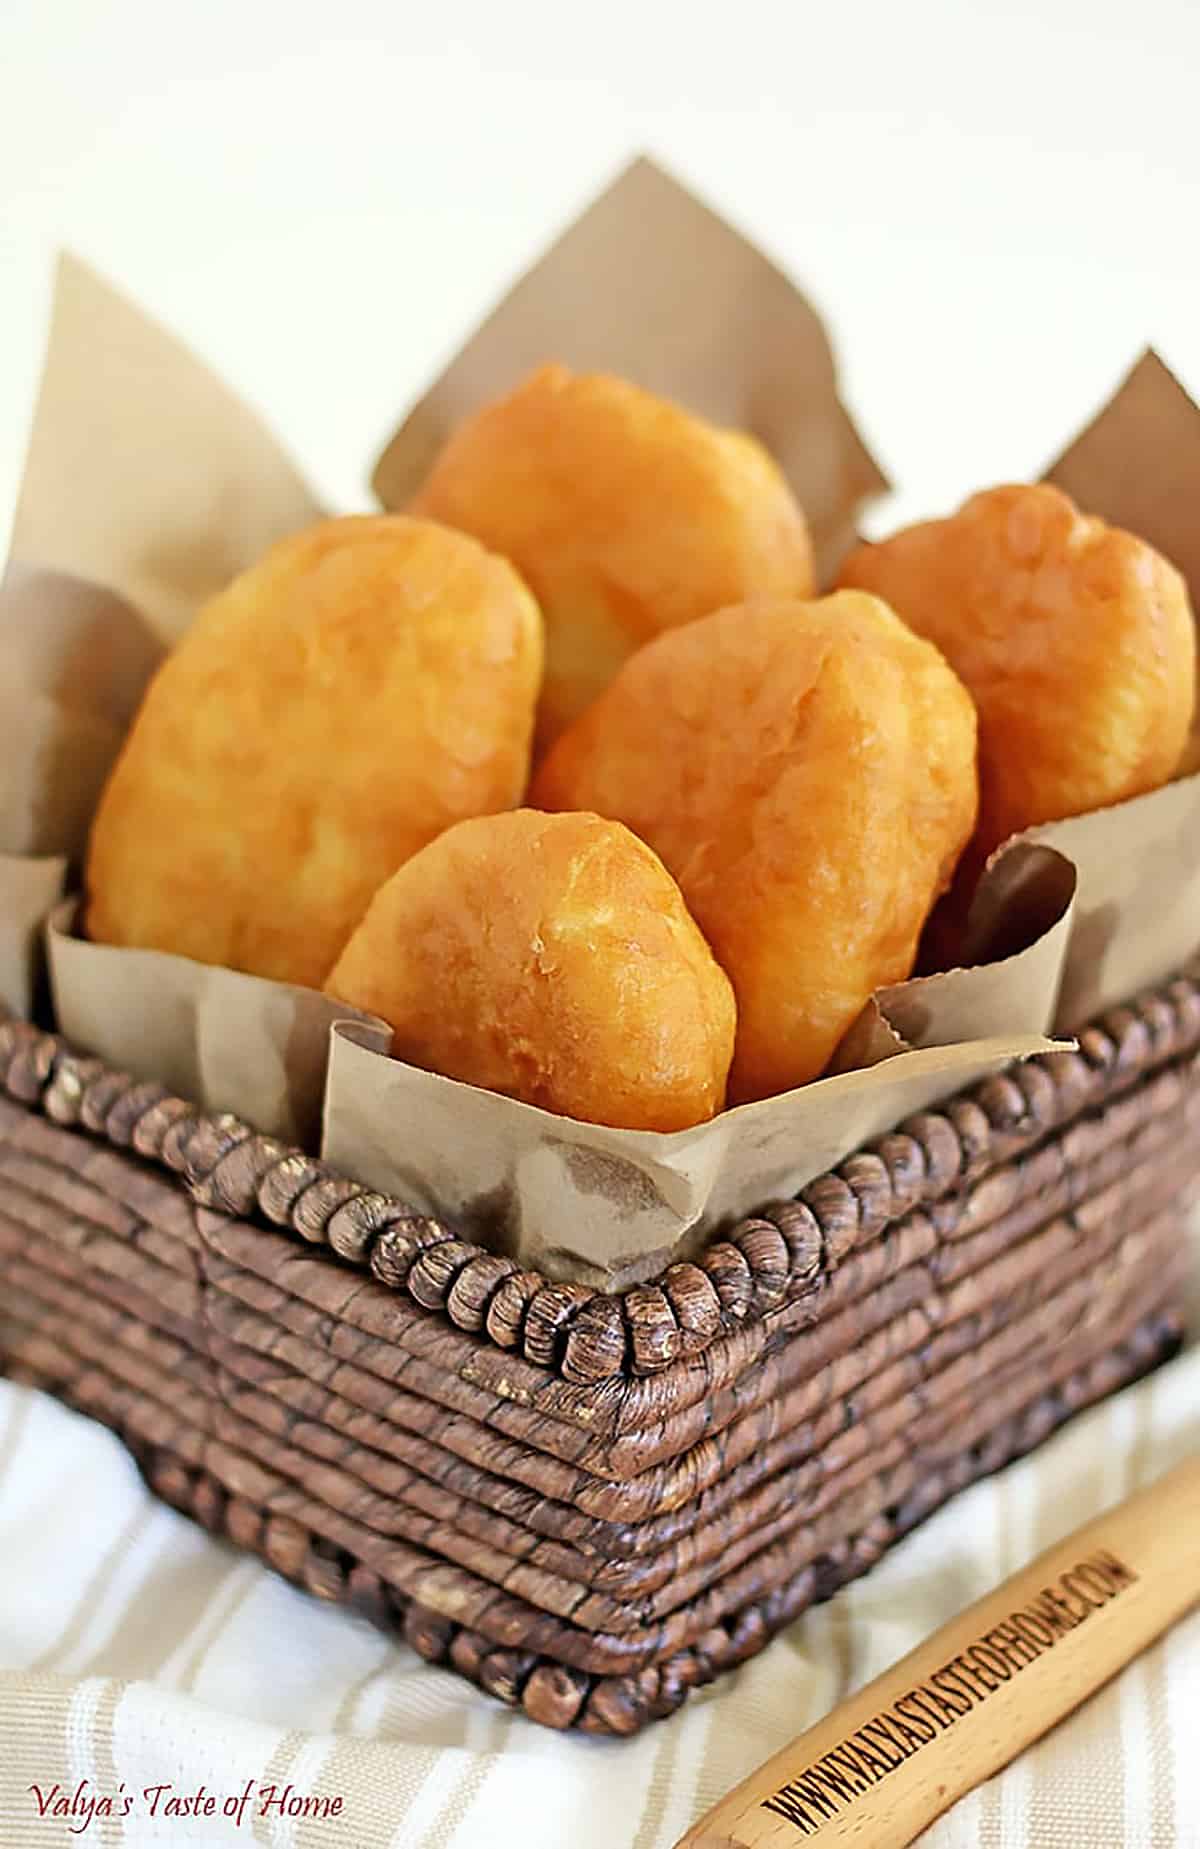 Pirozhki are an individual-sized fried dough pastry most commonly filled with beef and onion. You can use any sweet or savory filling to make pirozhki. 